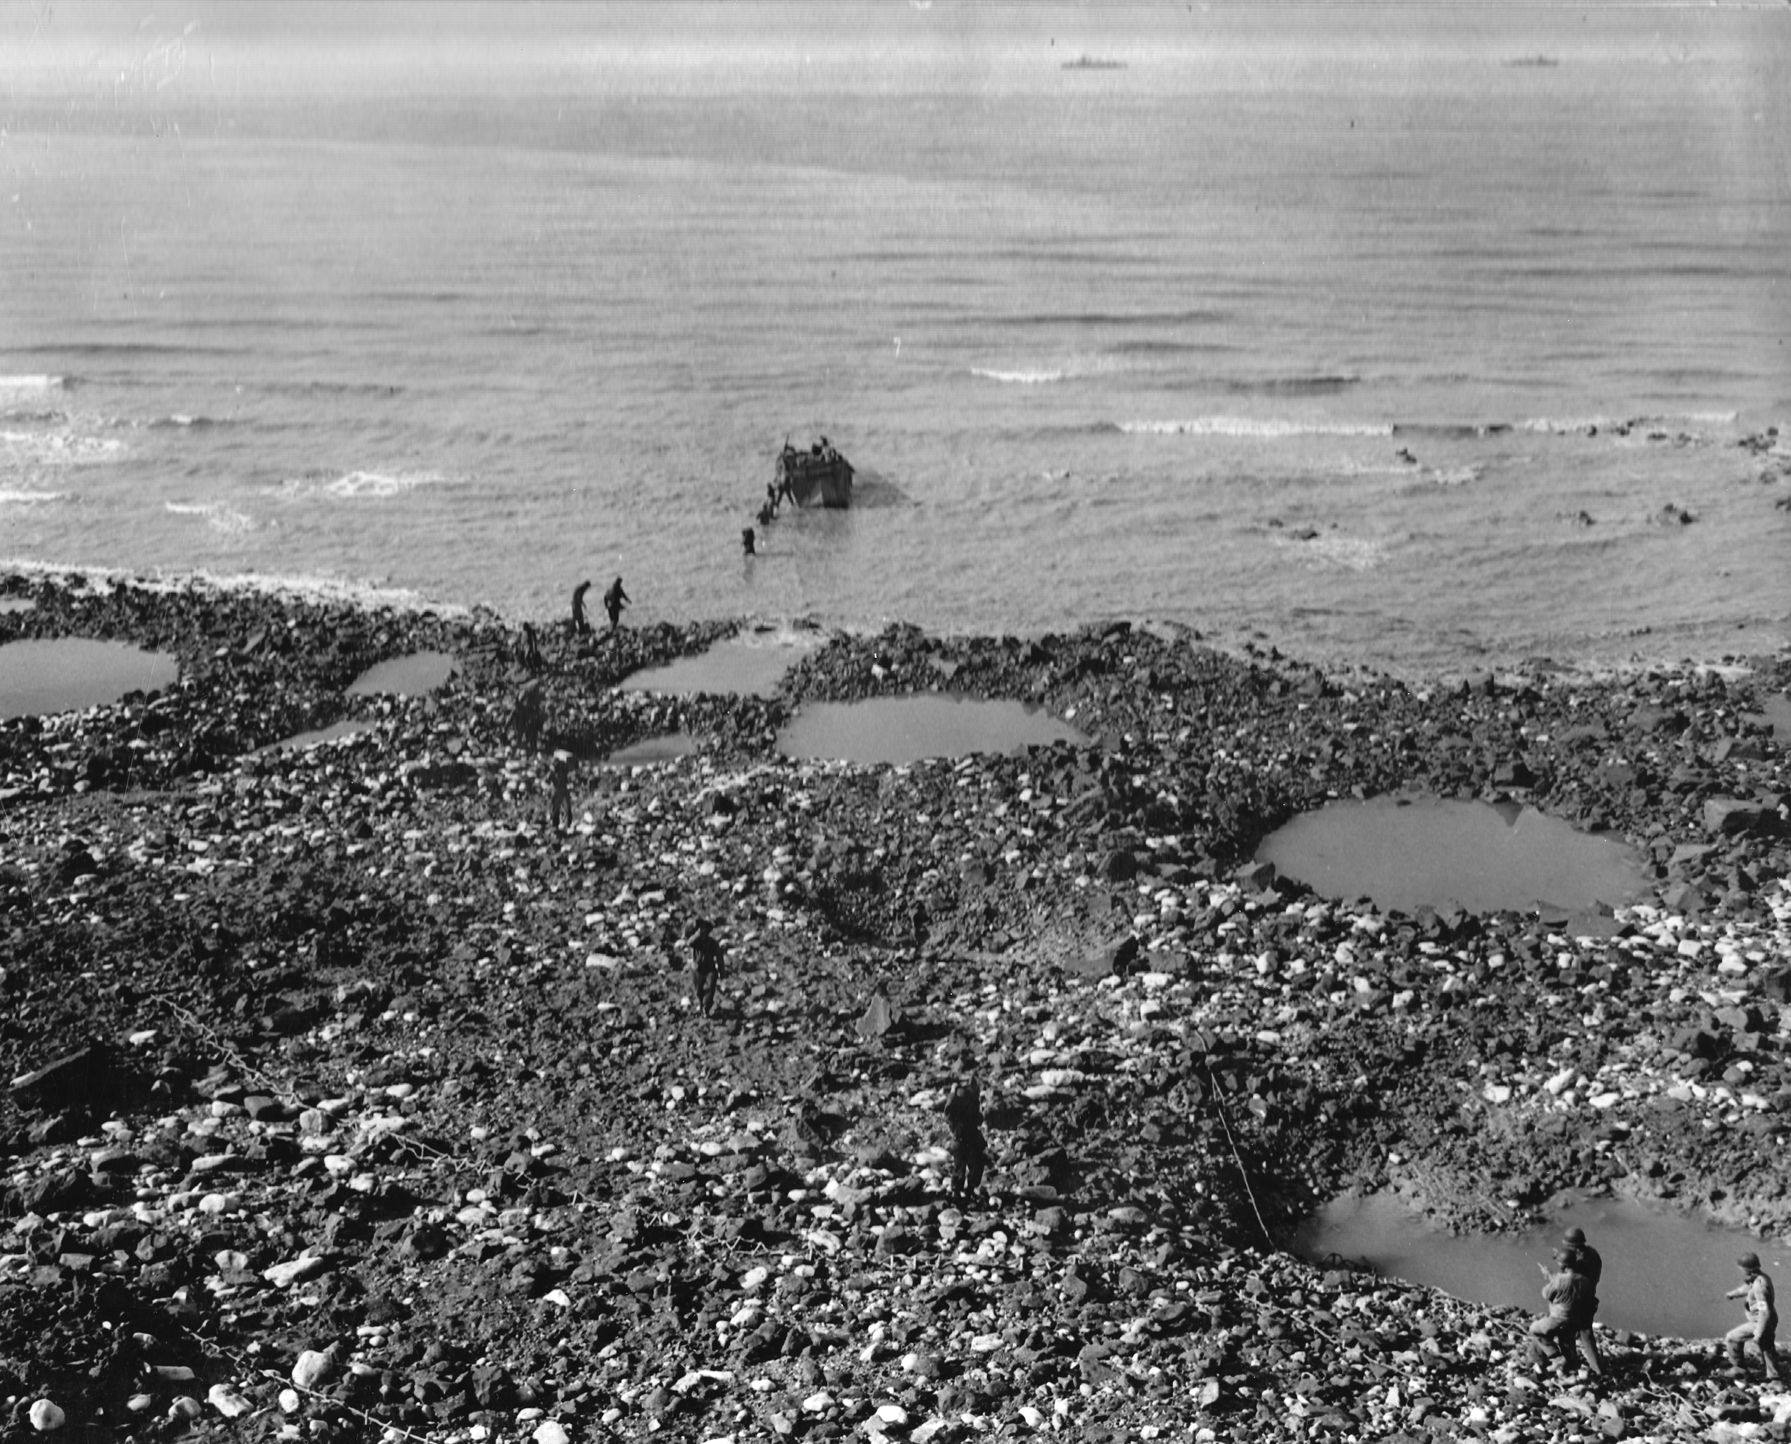 After Pointe du Hoc has been secured, a boat brings supplies ashore to beleaguered Rangers who have defended the position for hours. A pair of Allied naval vessels lies in the distance, and scaling ropes lay on the beach.